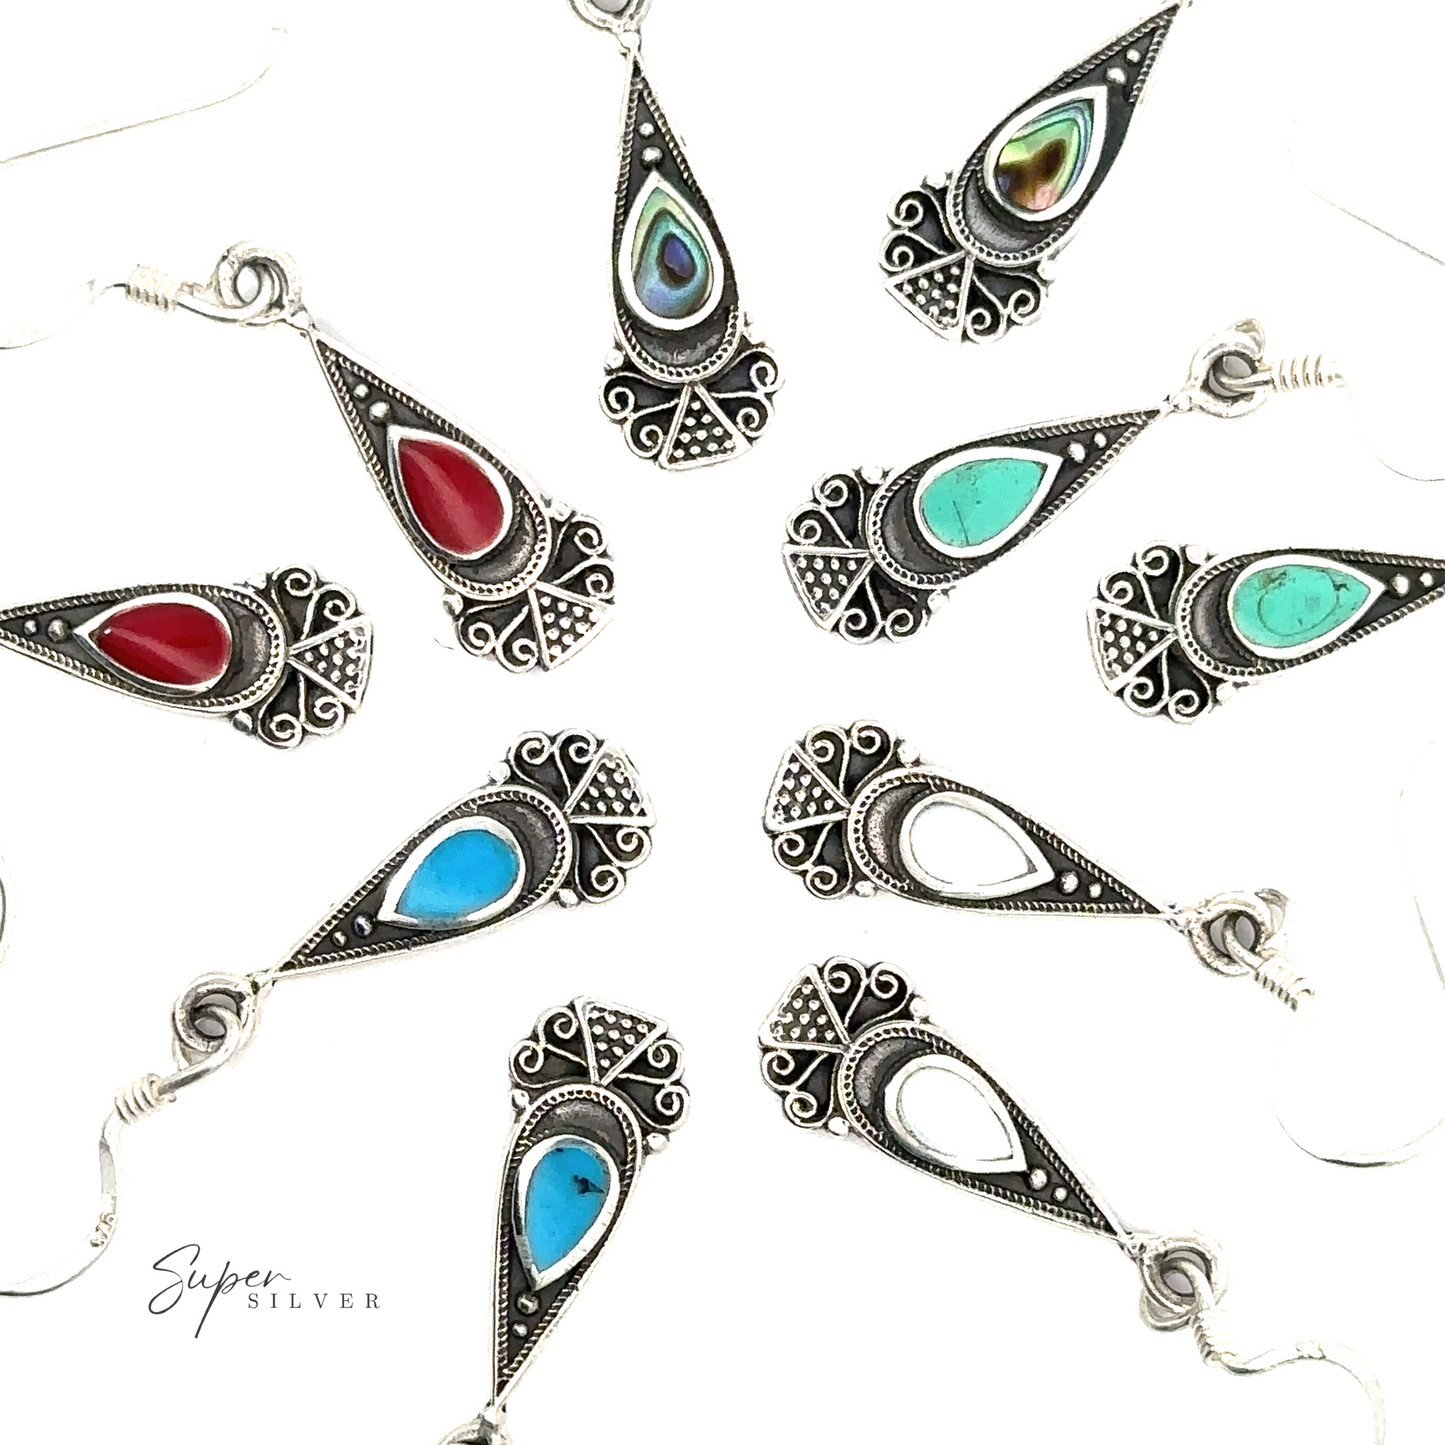 A group of Bali Inspired Teardrop Shaped Earrings with inlay stones in different colors.